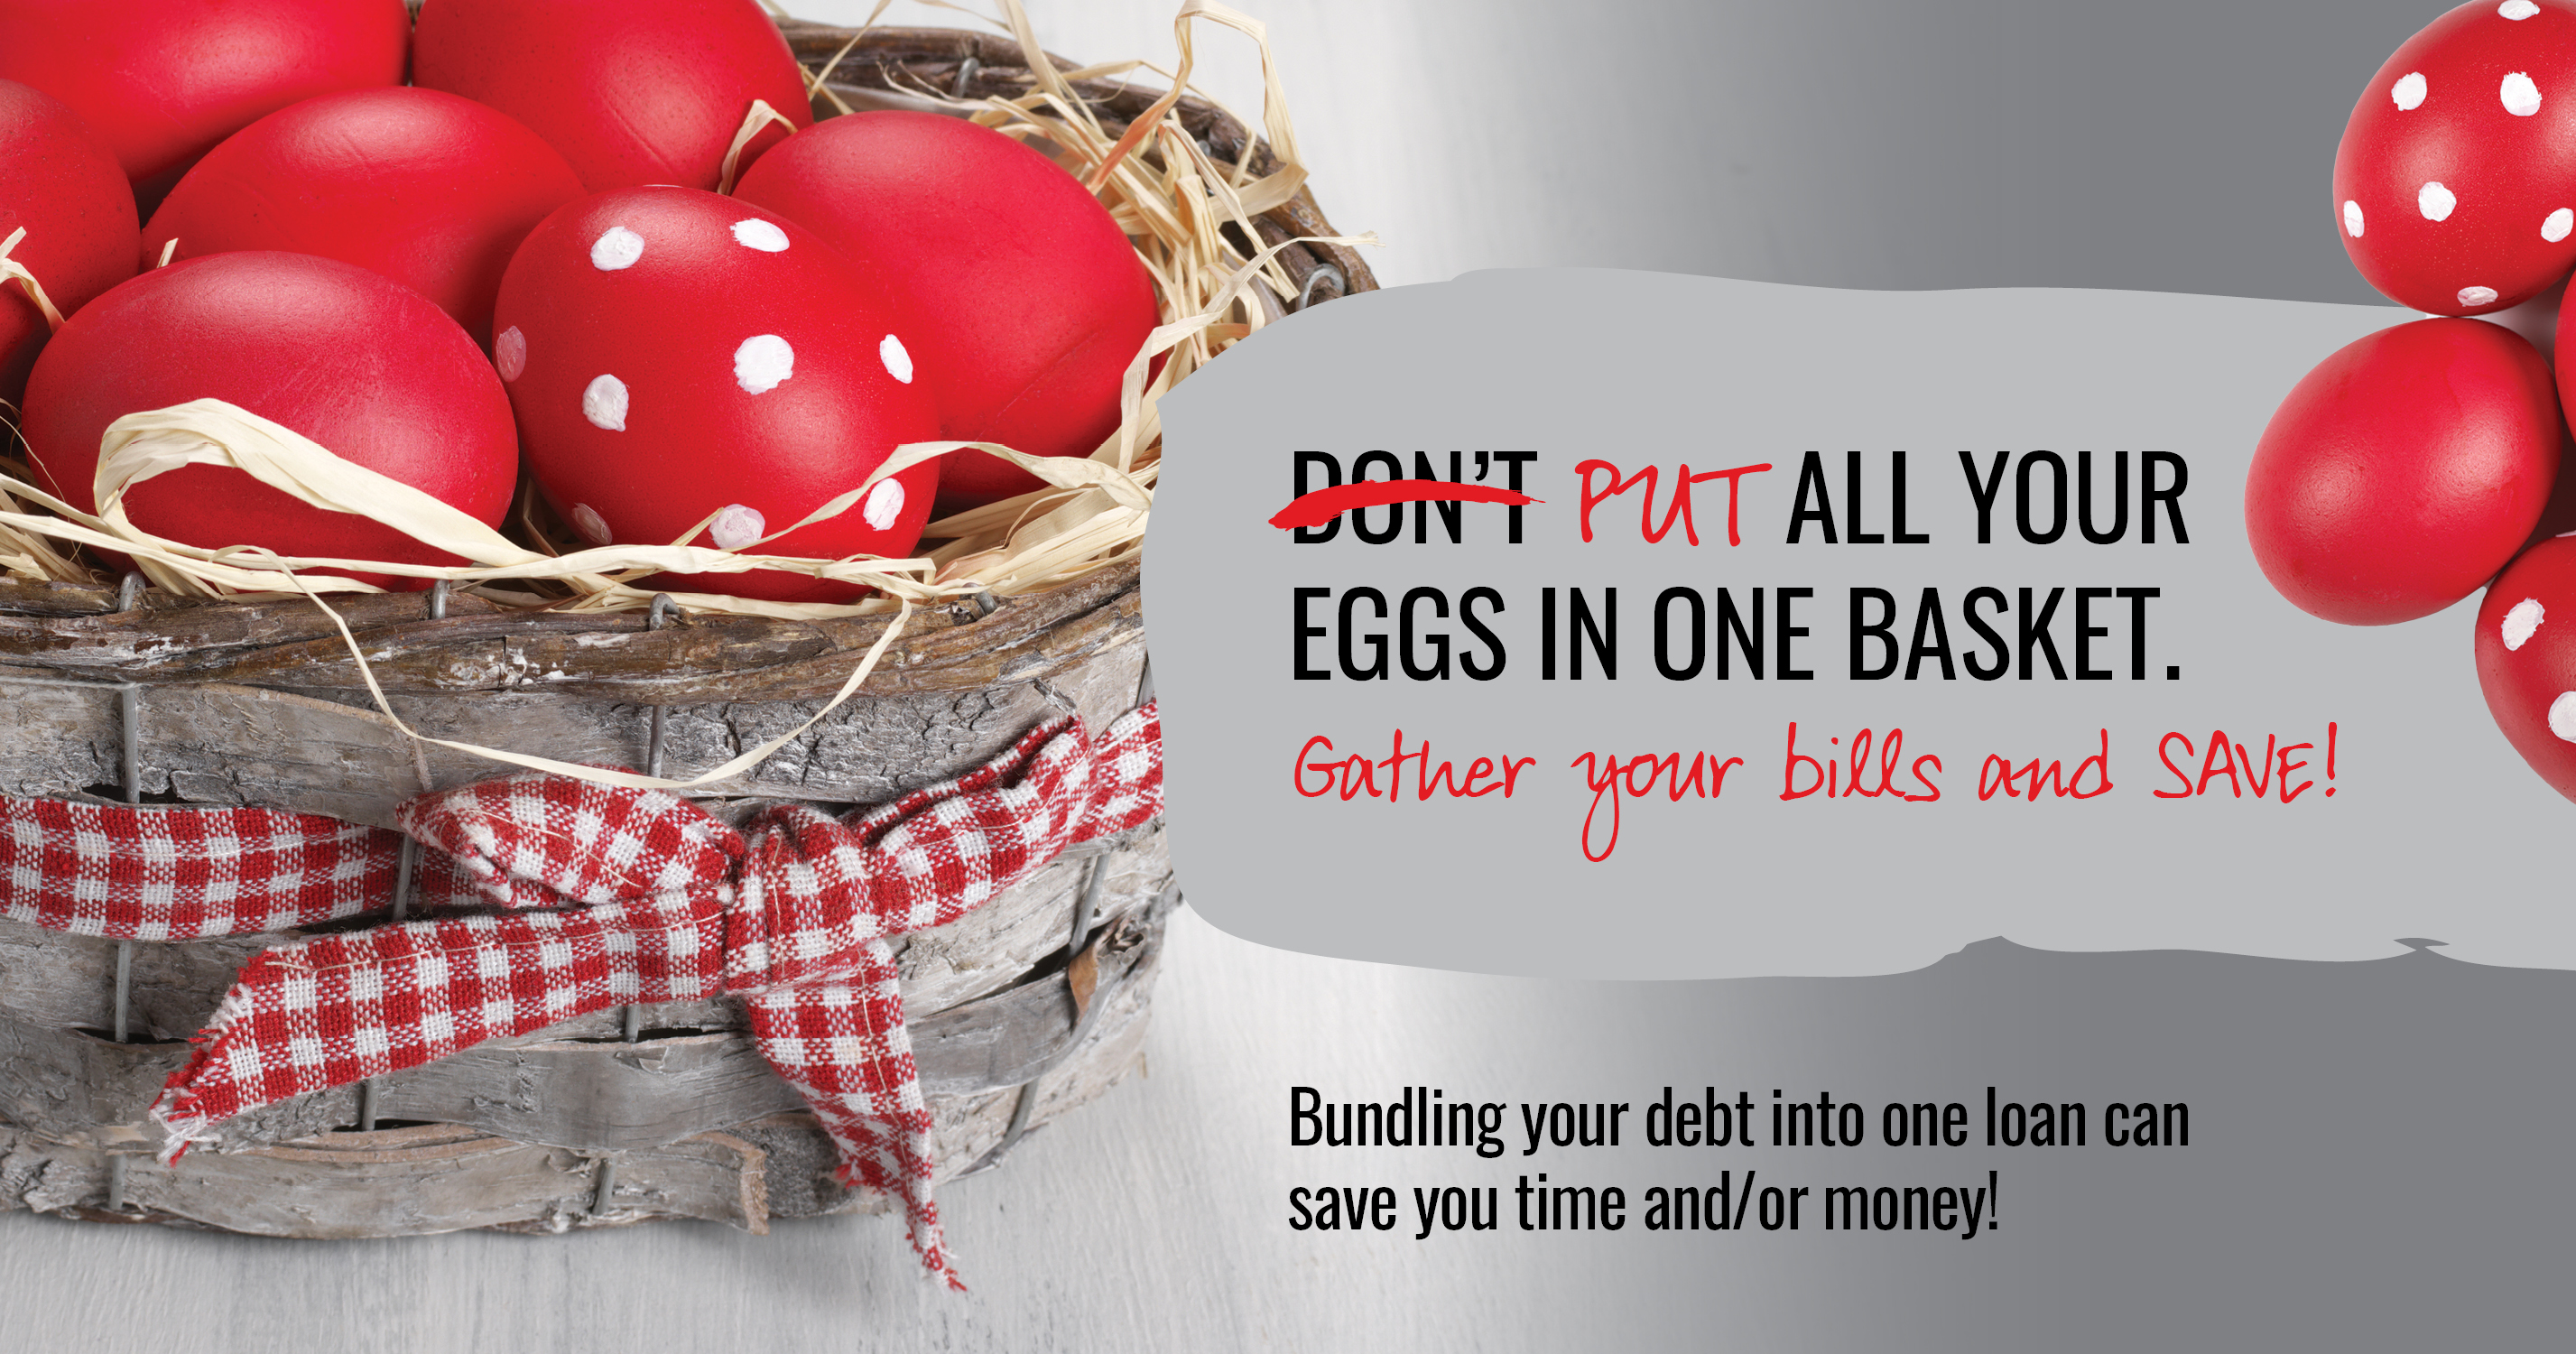 Don't put all your eggs in one basket. Gather your bills and save!

Bundling you debt into one loan can save you time and/or money!